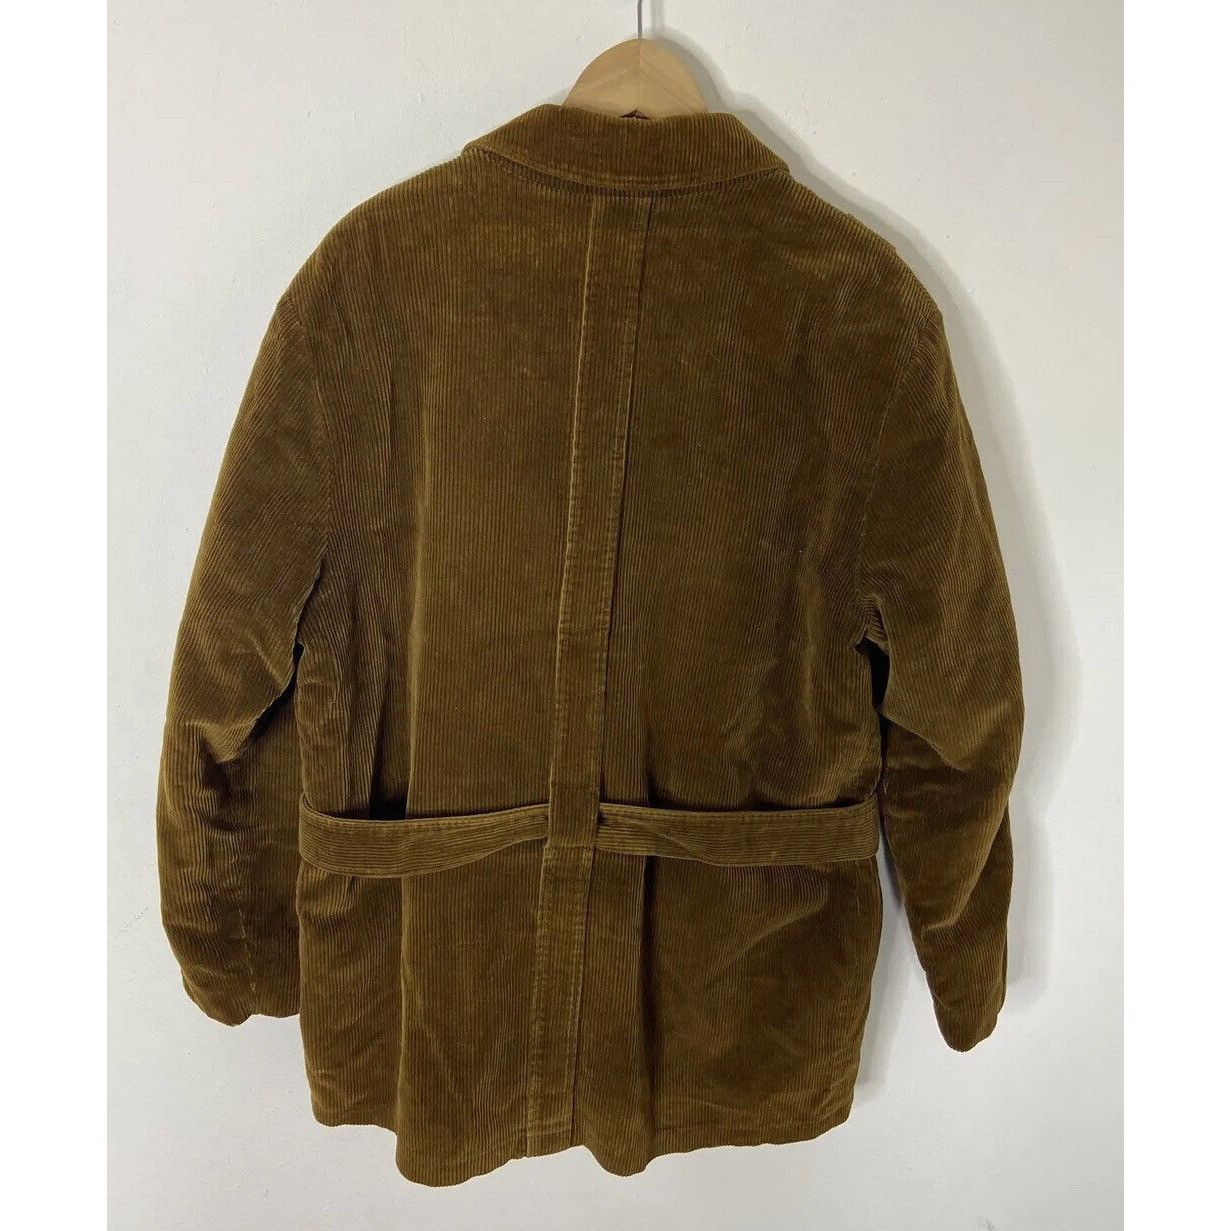 Field And Stream Vintage Field and Stream Men 40 S/M Corduroy Hunting Coat Size US M / EU 48-50 / 2 - 2 Preview